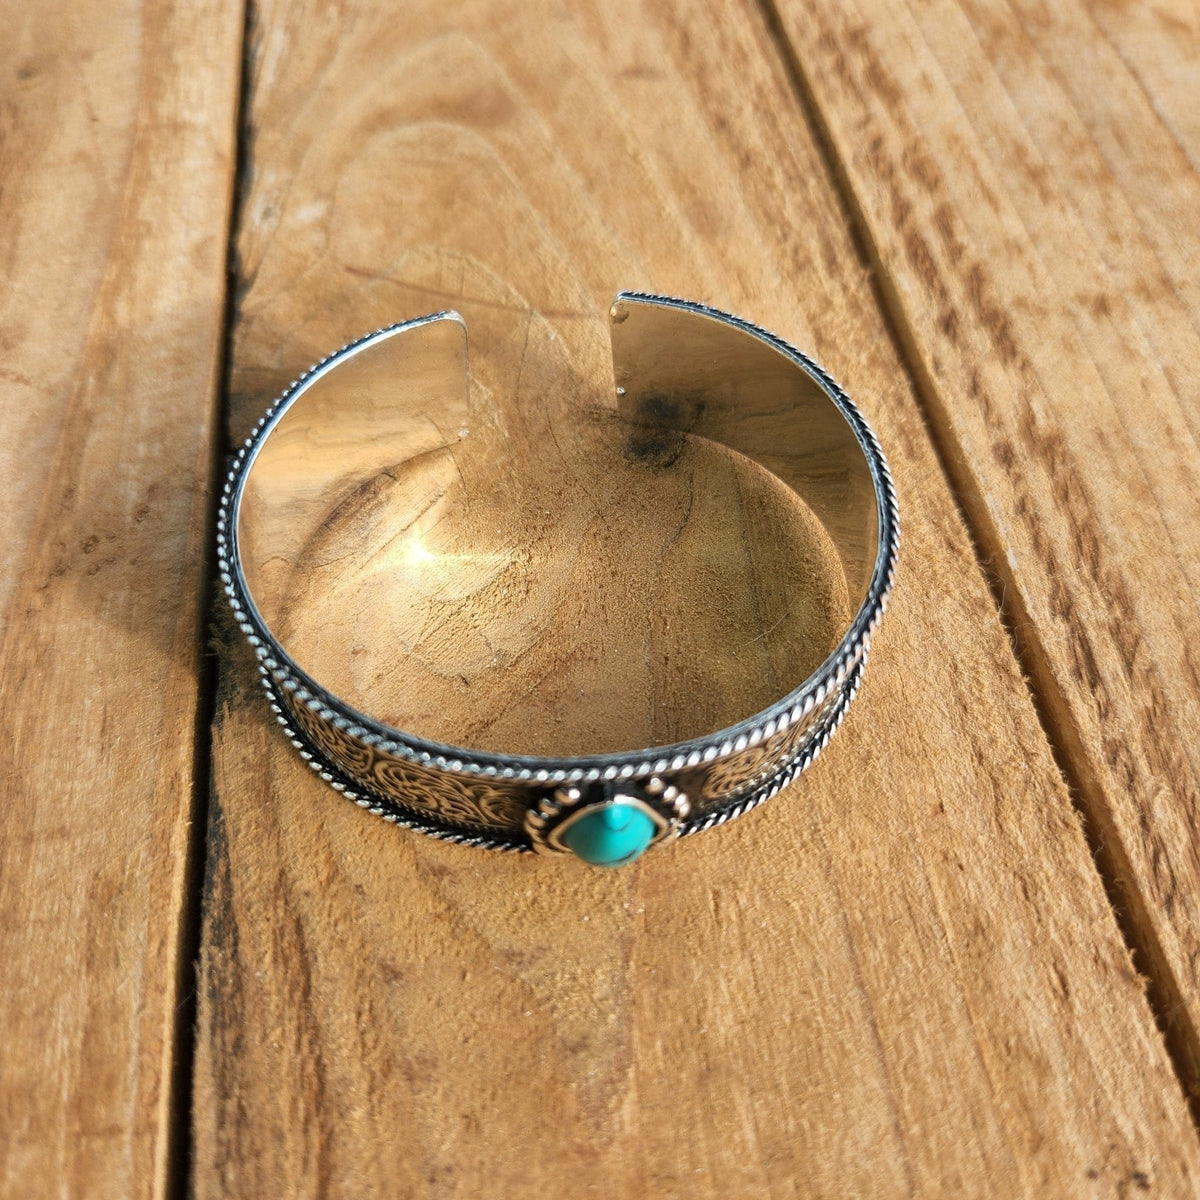 Stamped Silver Cuff Bracelet with Turquoise Stone Western Bracelet TheFringeCultureCollective